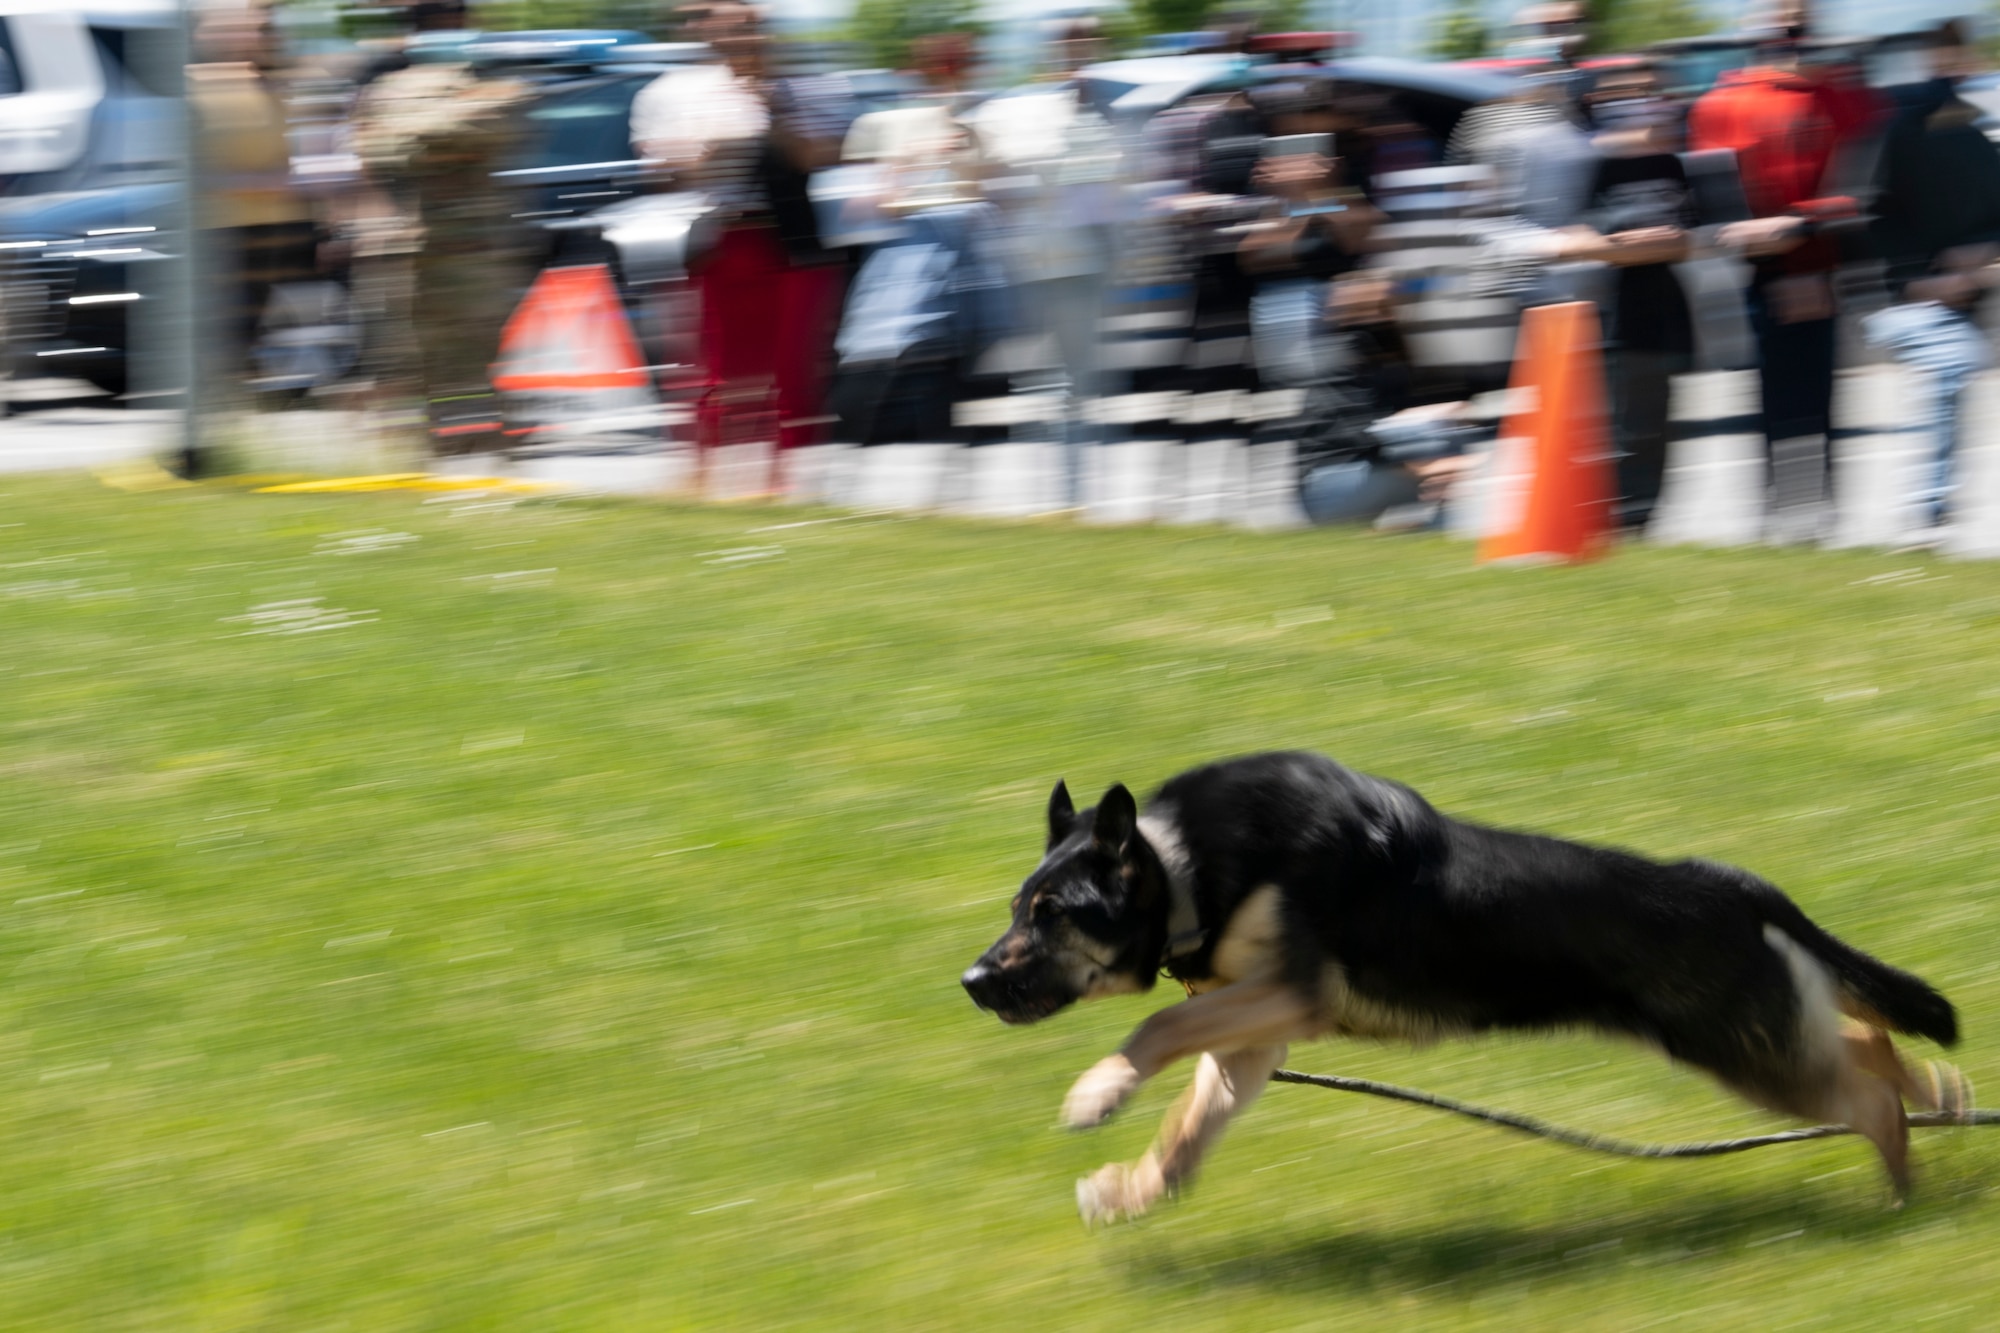 U.S. Air Force military working dog runs during demonstration.